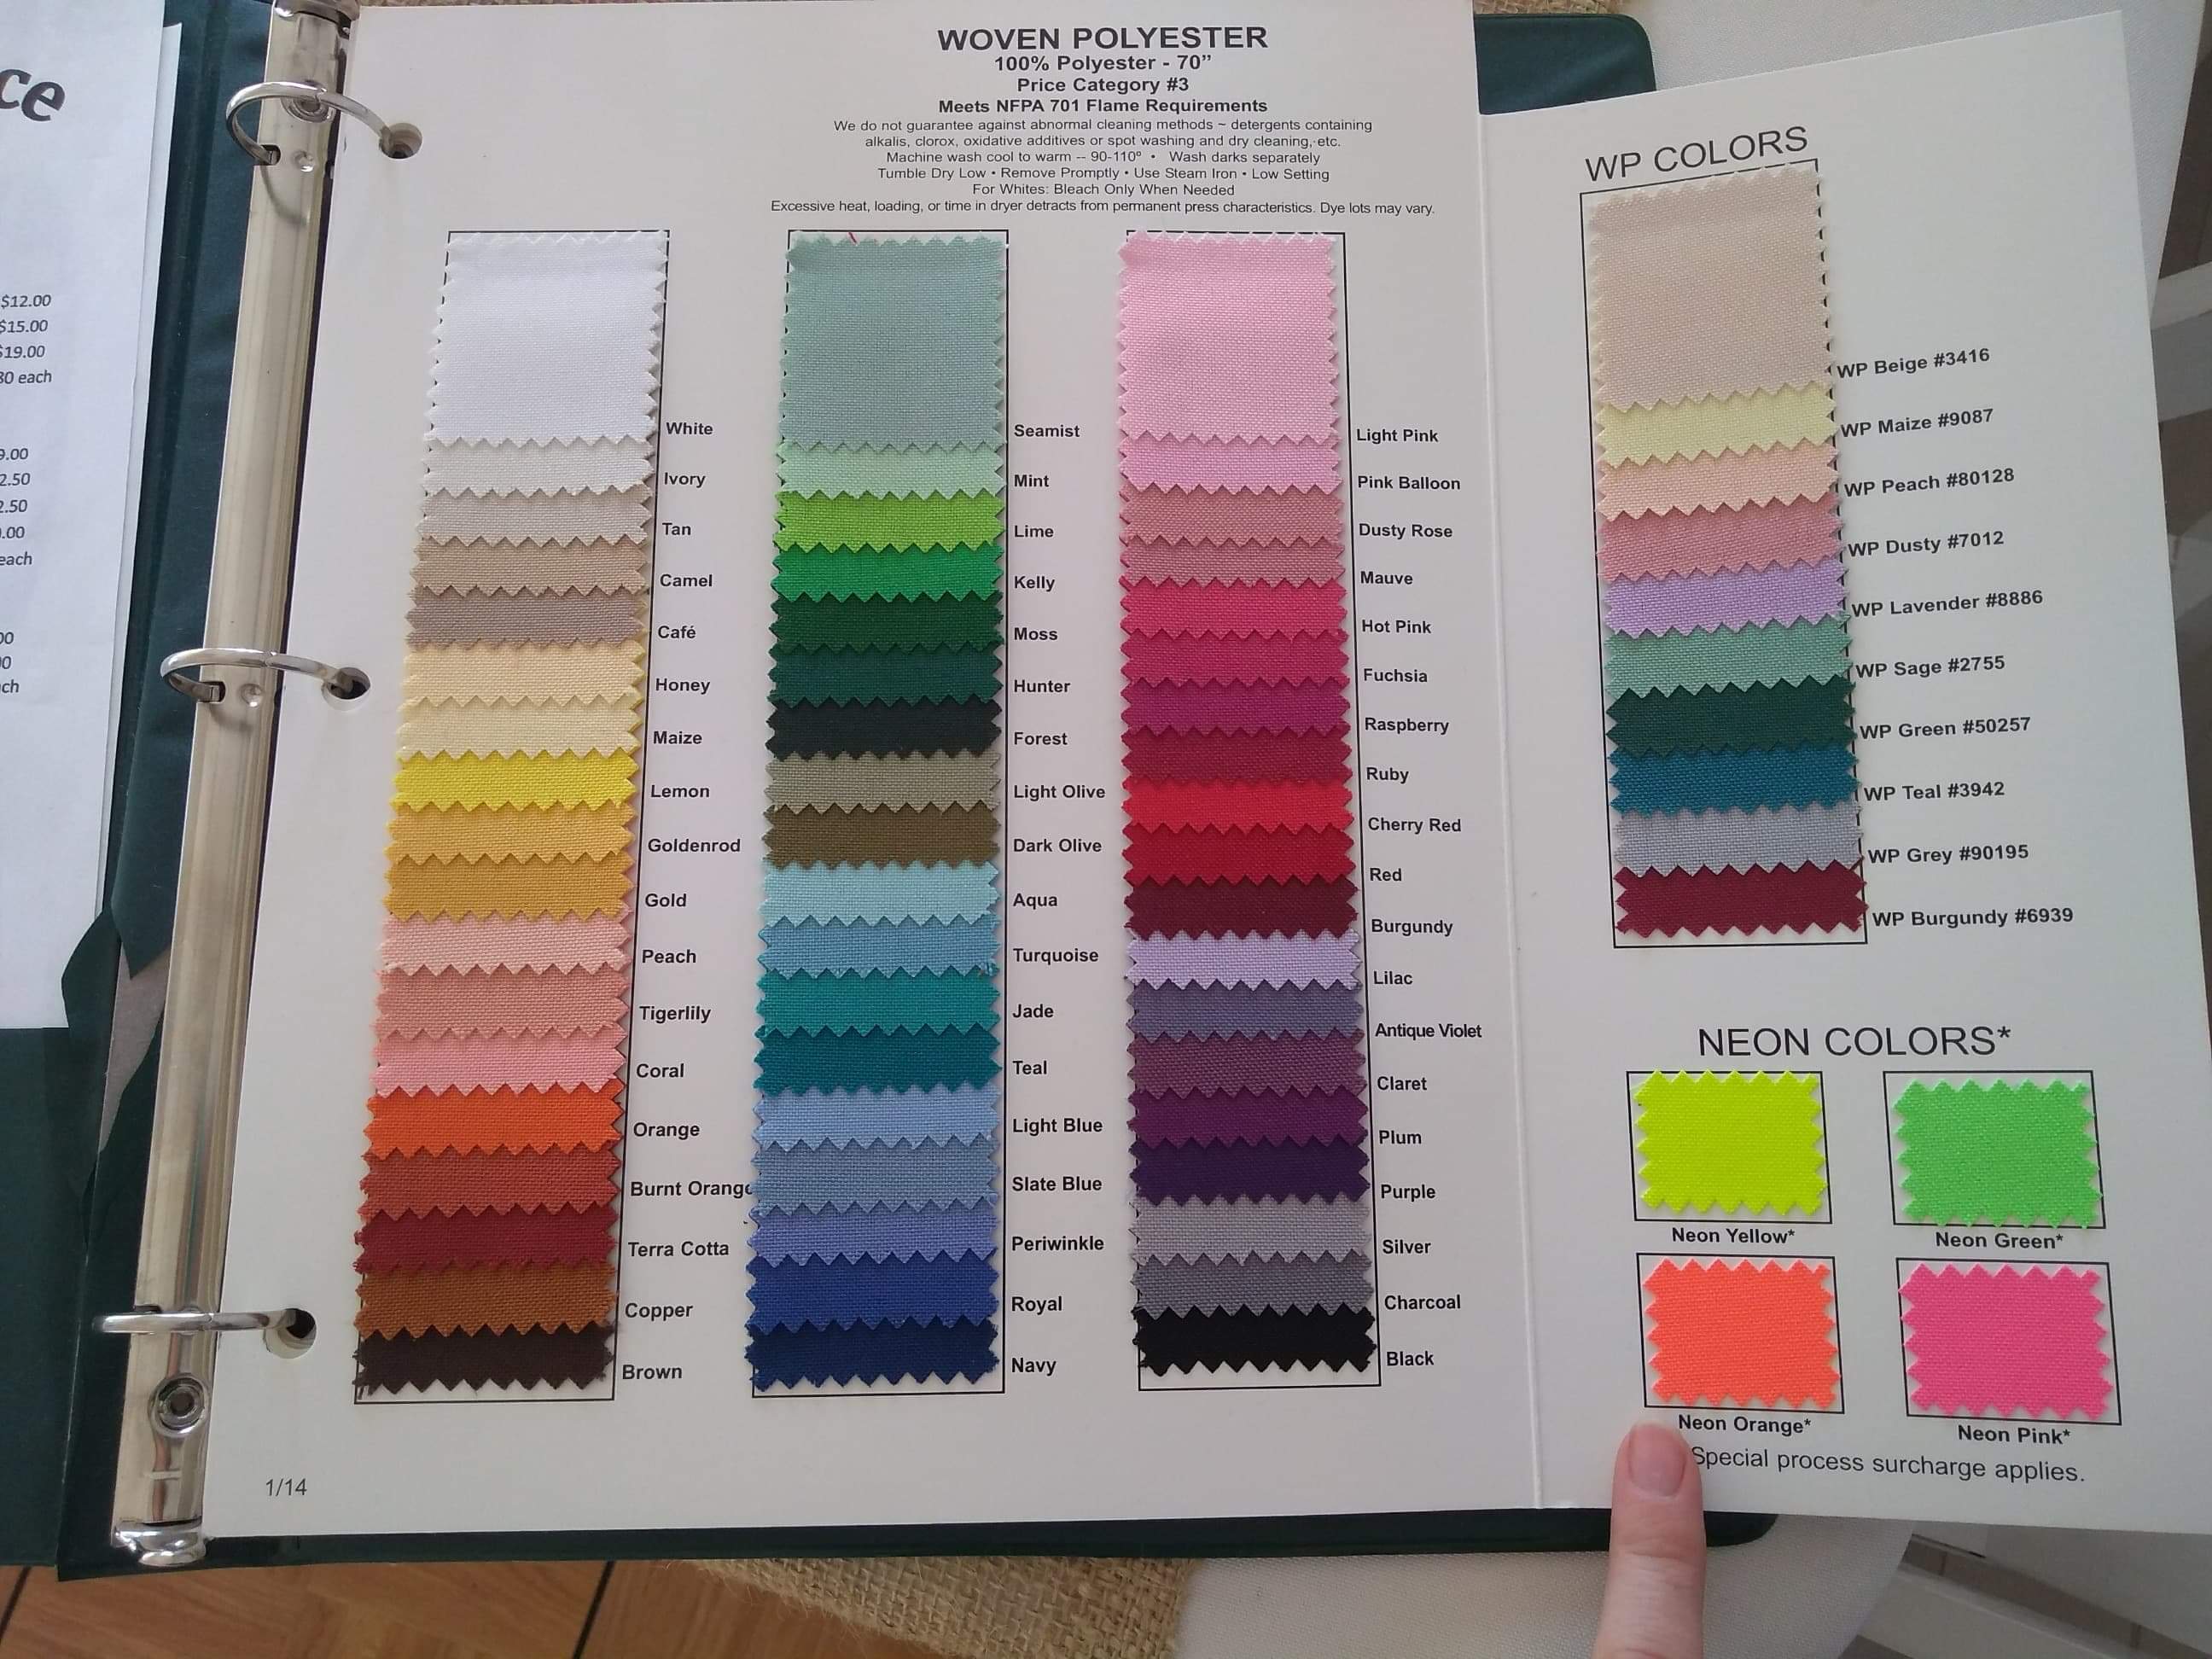 Round Tablecloth Chart